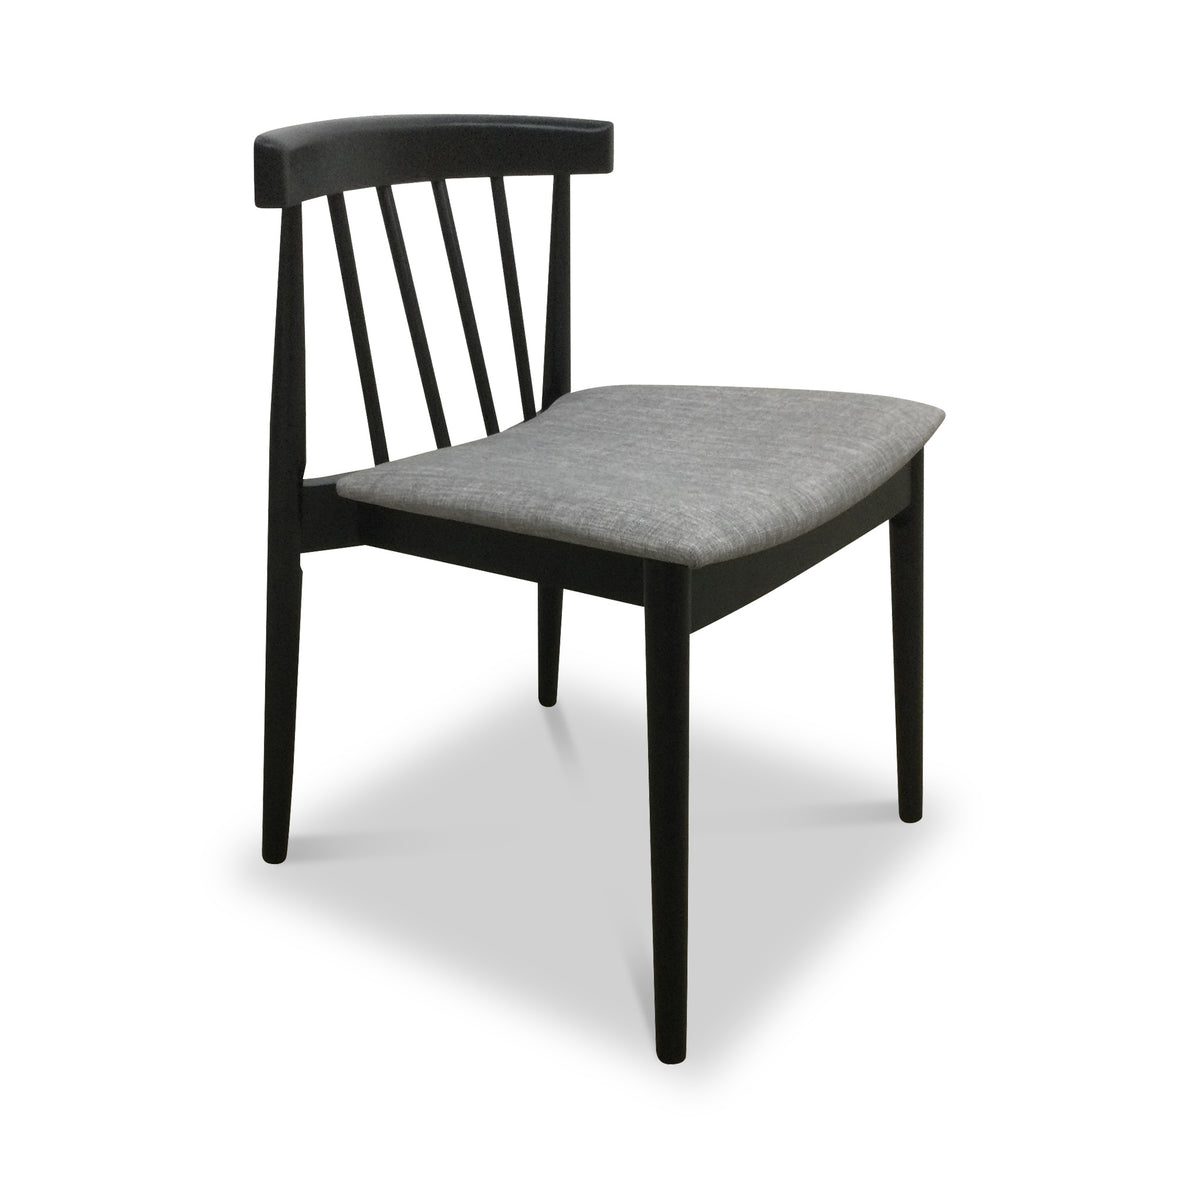 Jackson Dining Chair with Black Frame with grey seat from Roseland Furniture